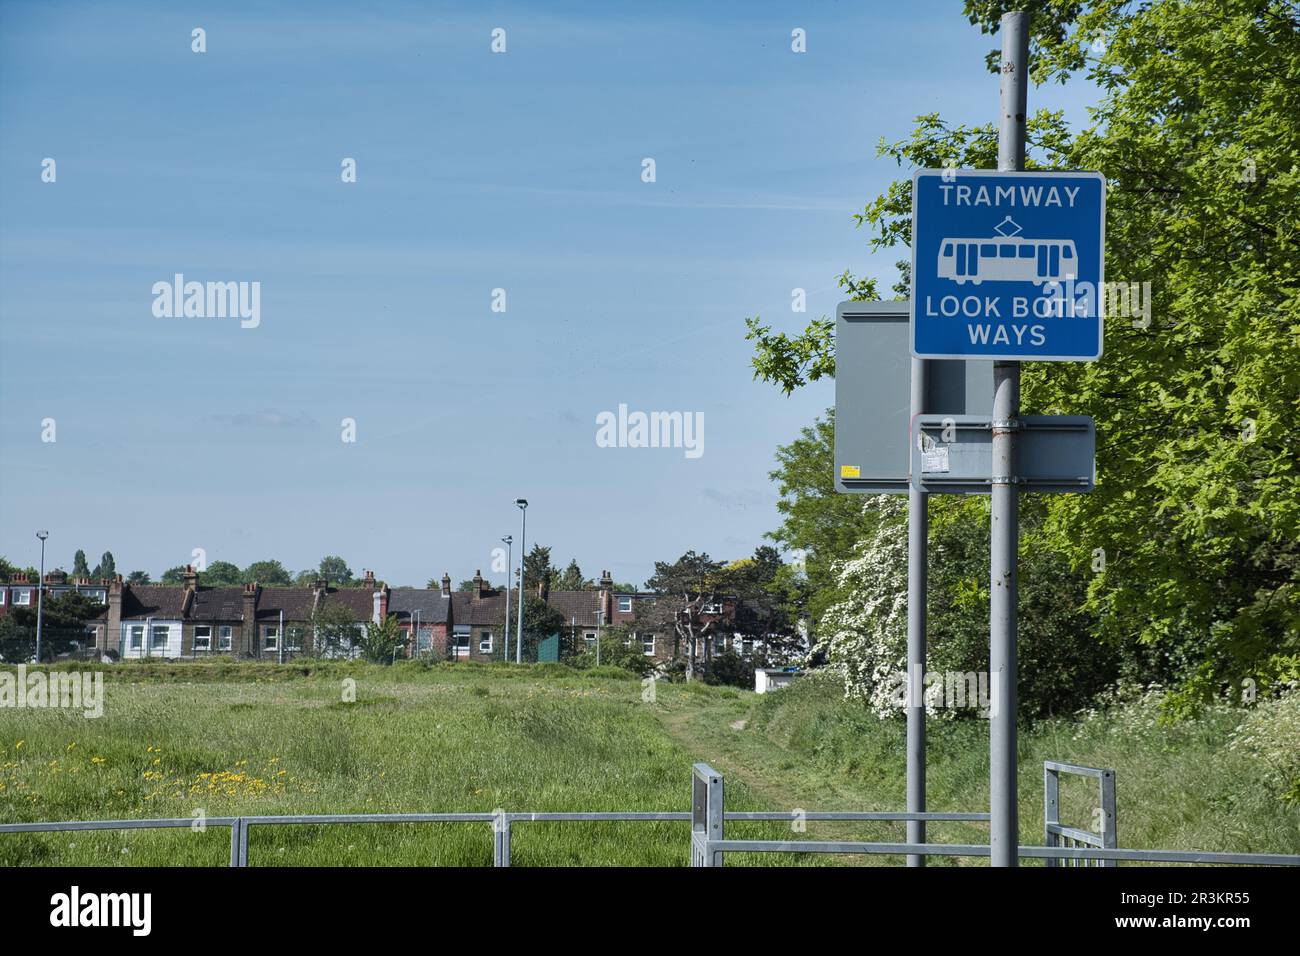 Tram warning sign in South Norwood Park in Croydon, South London Stock Photo